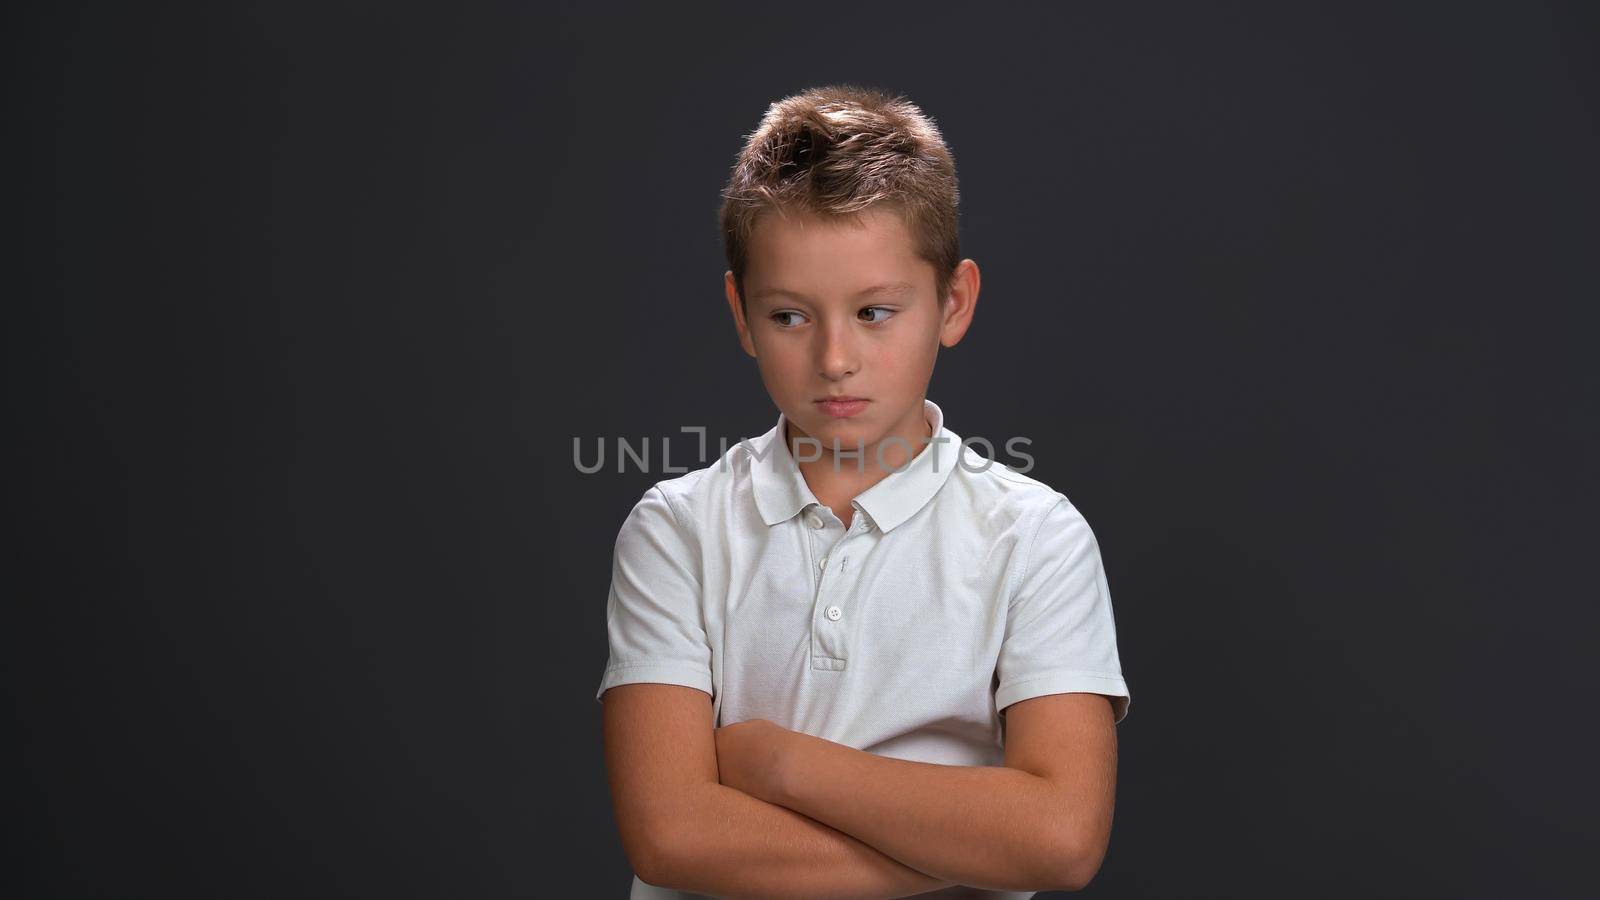 Unhappy or sad little boy looking a side frowning wearing white polo shirt and black pants isolated on black background.